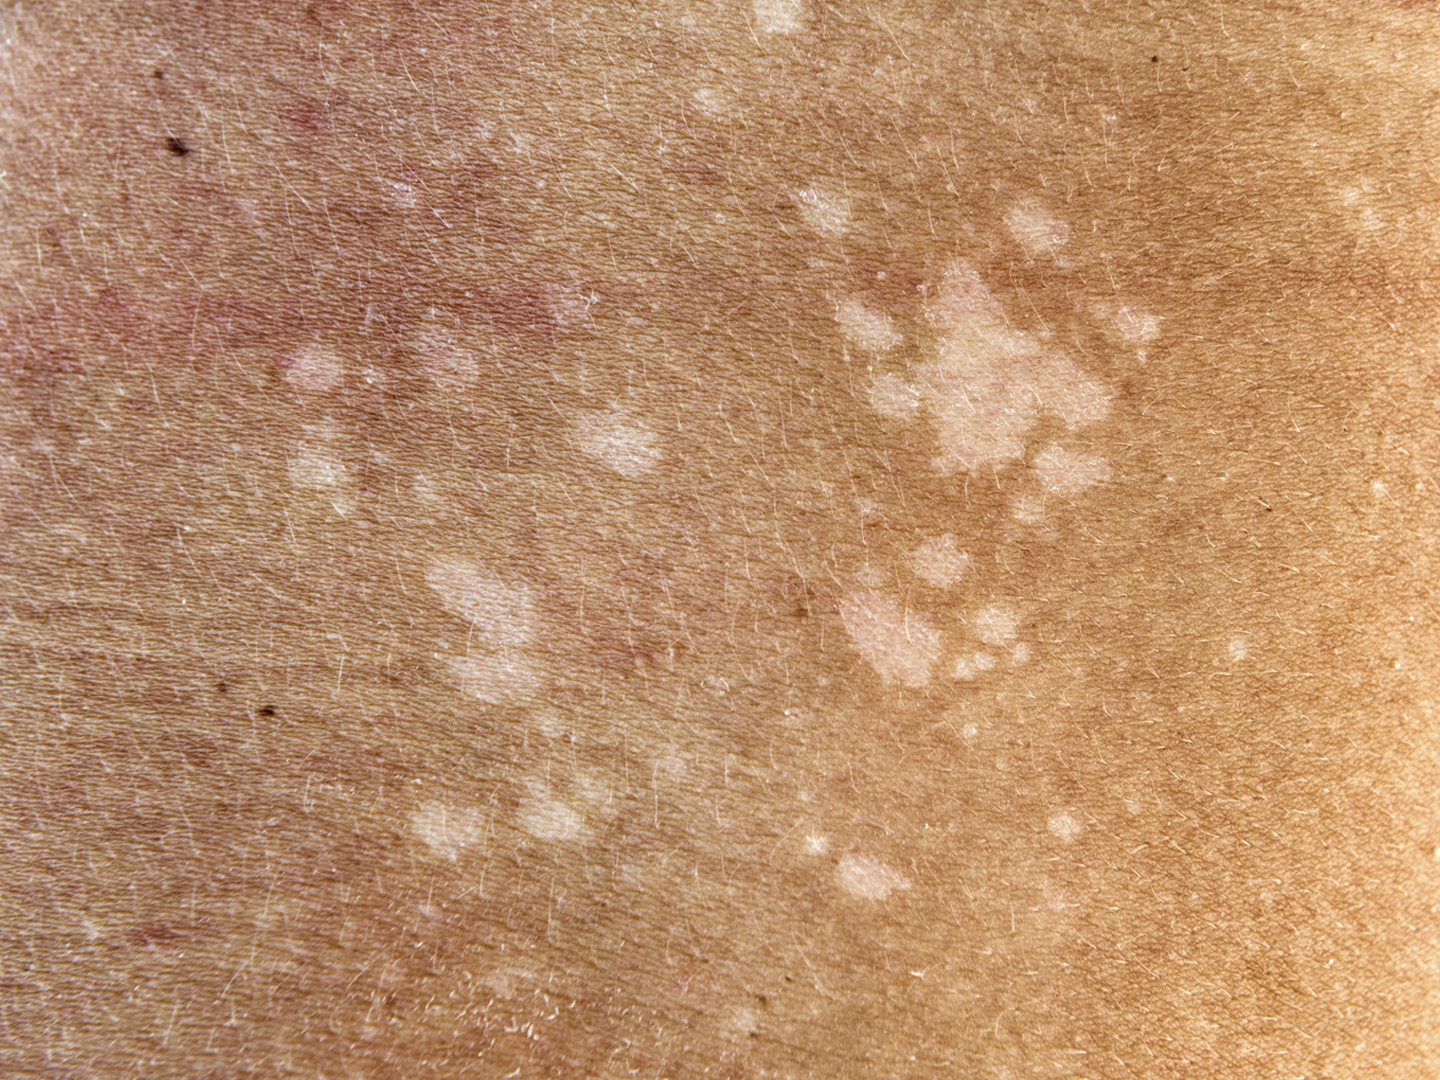 Skin Fungus, Tinea Versicolor on the human back. Nikon D800e. Converted from RAW.